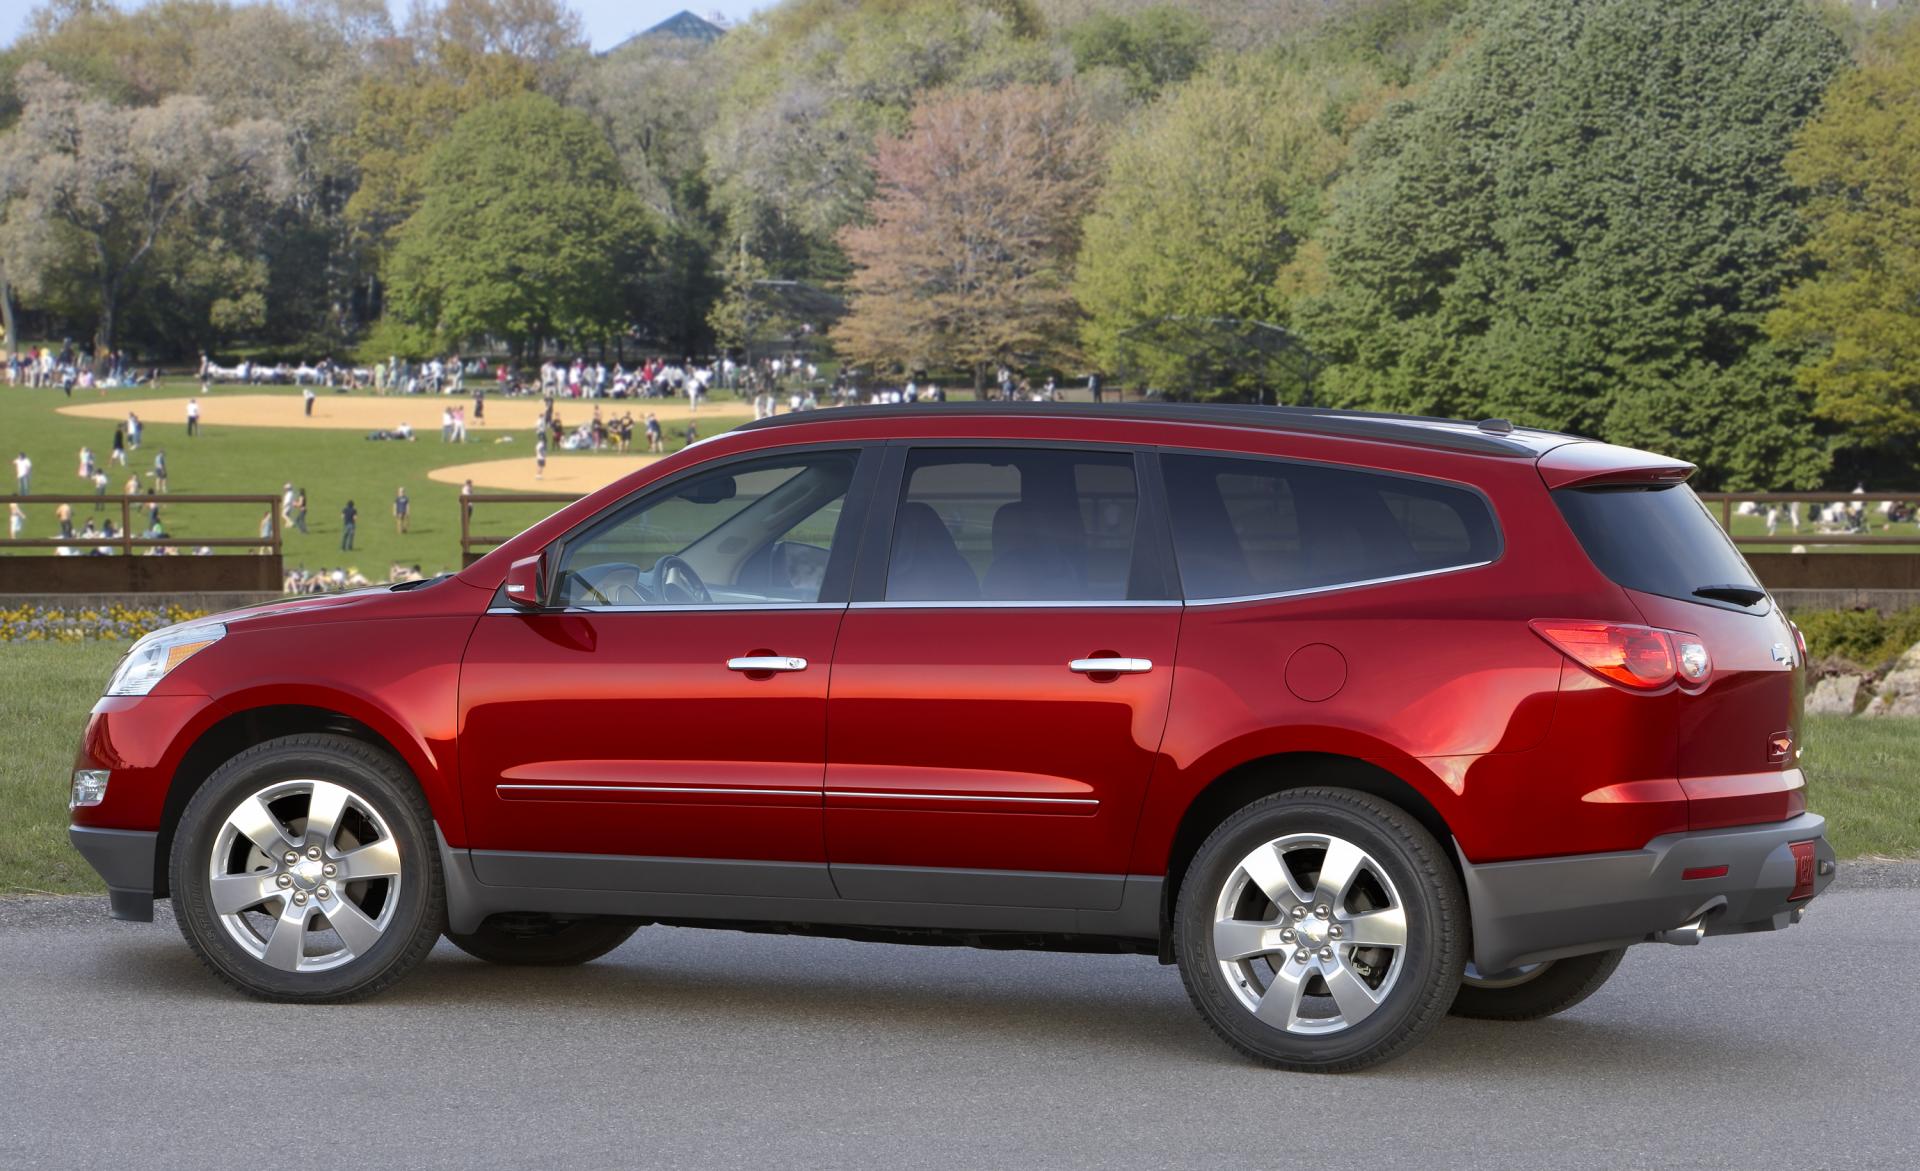 2012 Chevrolet Traverse News and Information